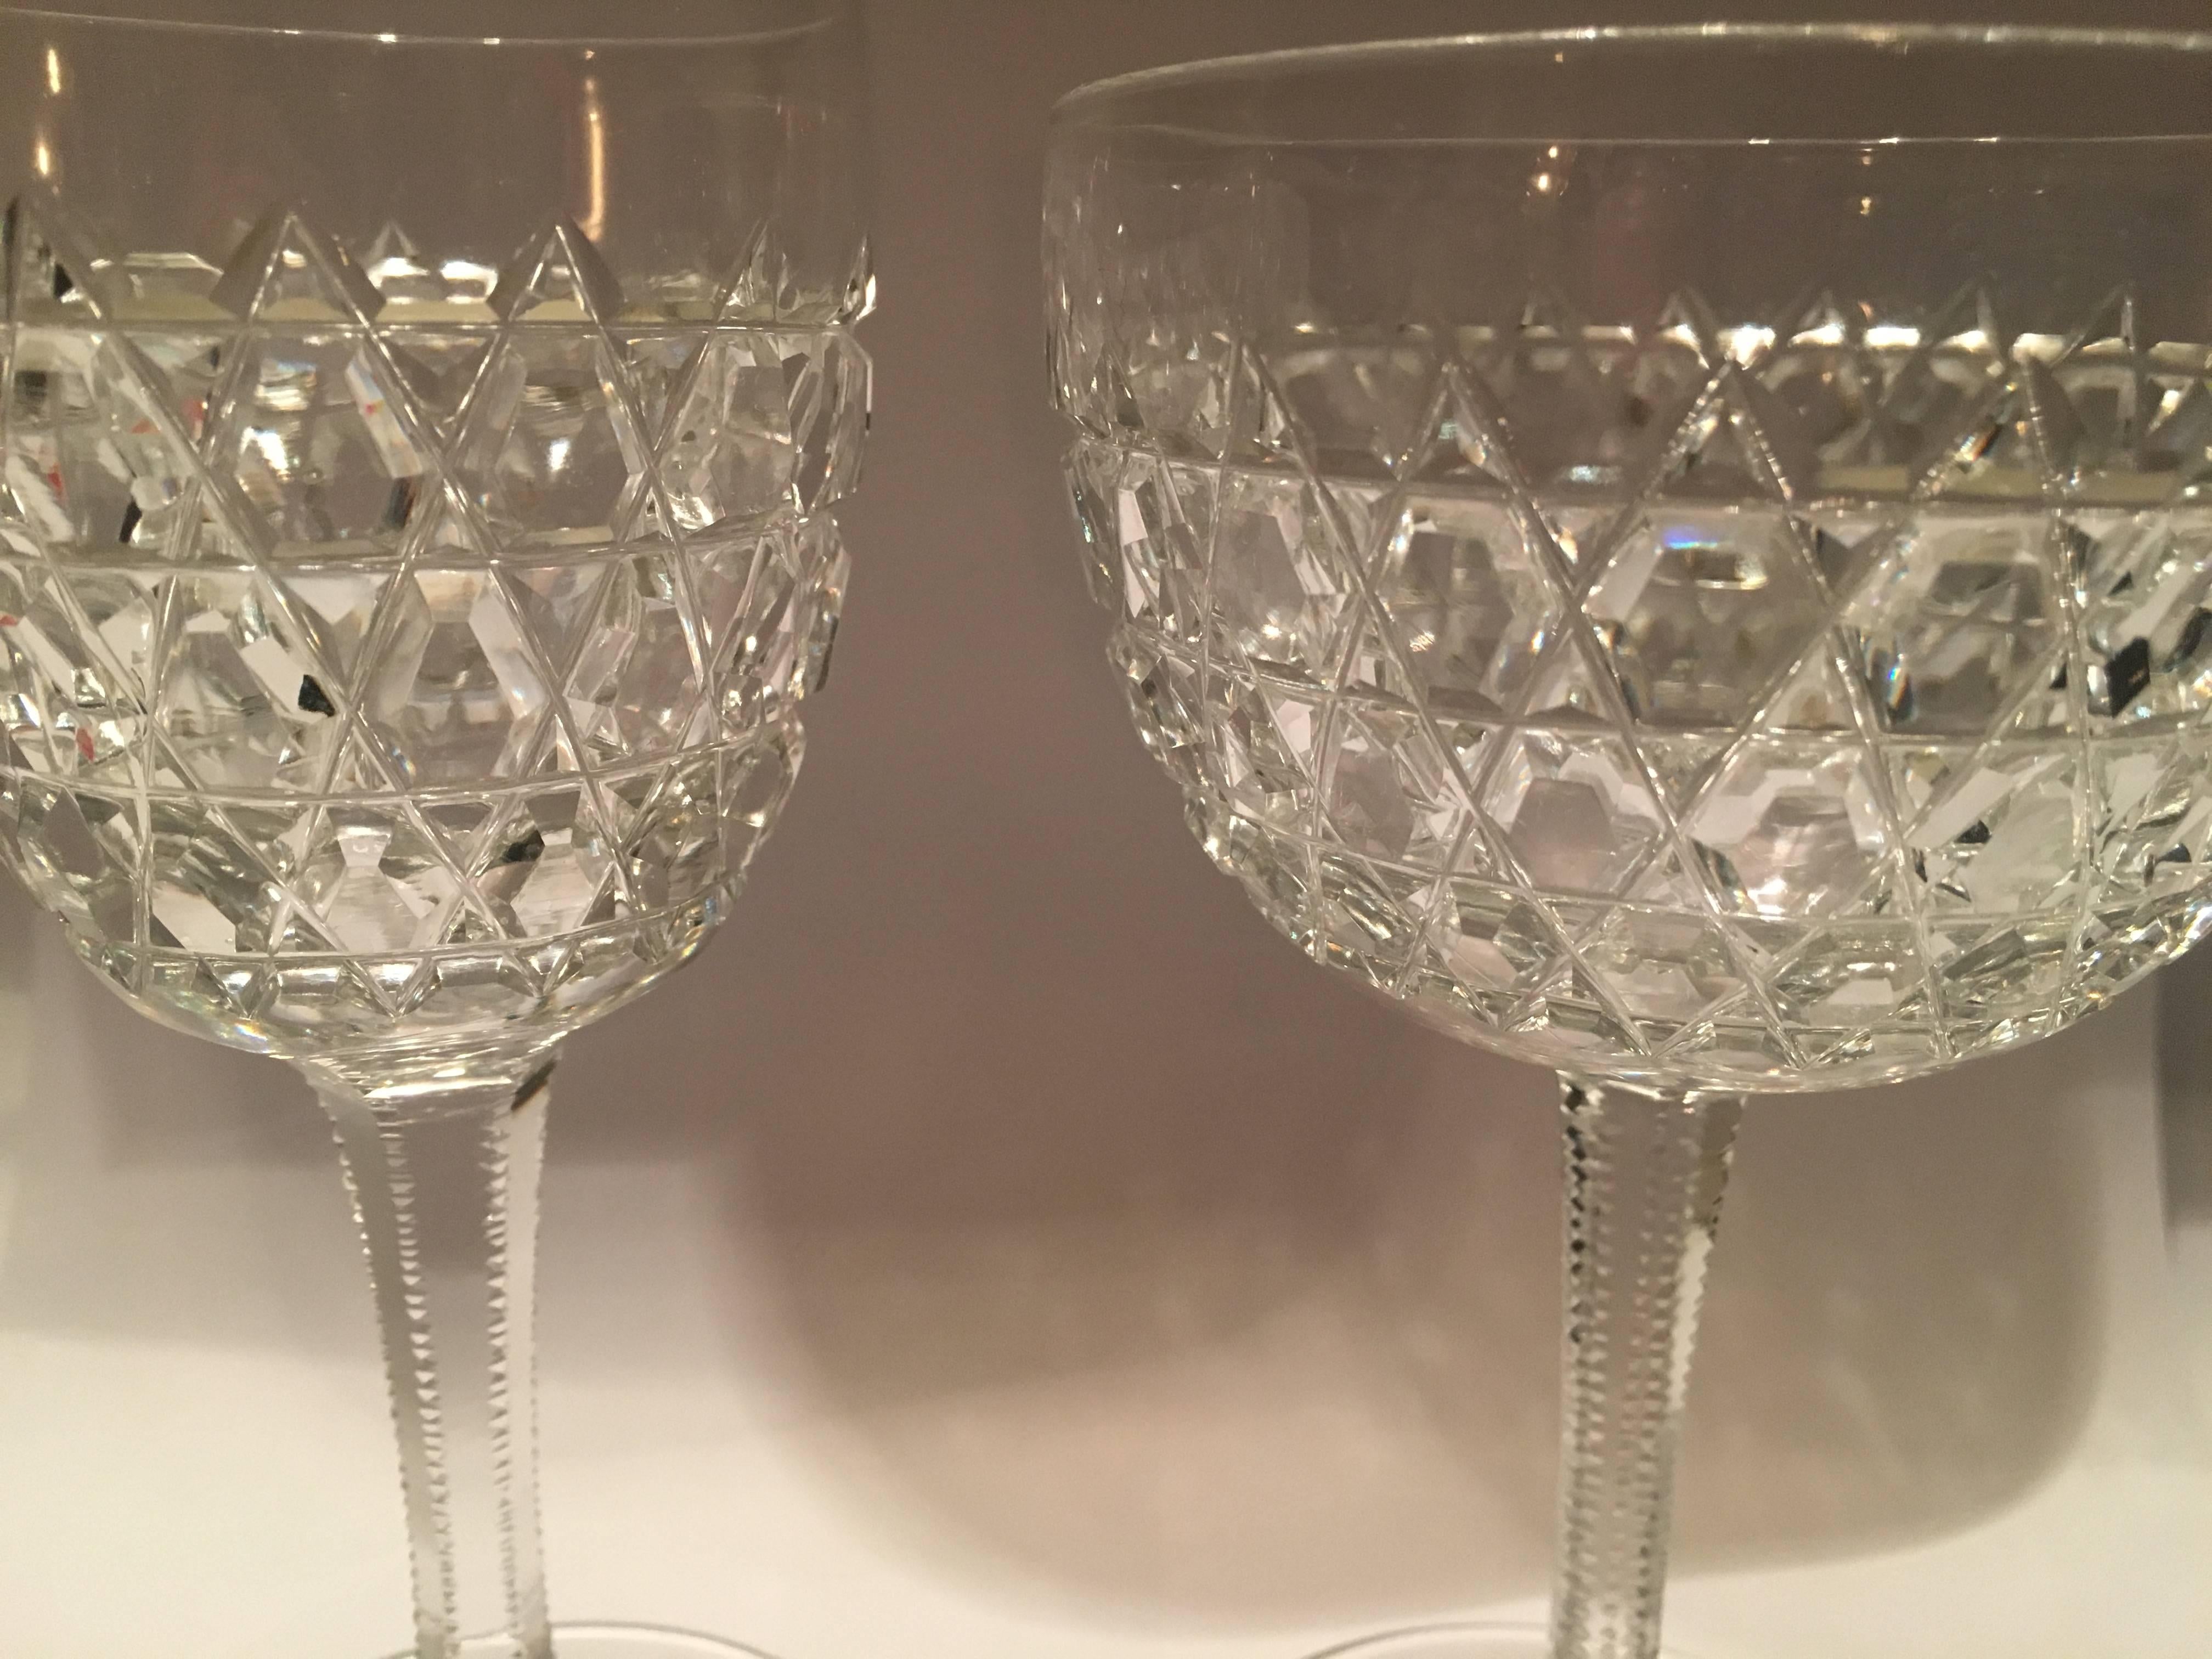 A mixed set of ten hand-cut, handblown Victorian hobnail crystal glasses. The five tall ones are perfect for an aperitif and the five wider glasses could be used for drinking champagne (albeit petite), dessert wine, port, mini martinis, whatever